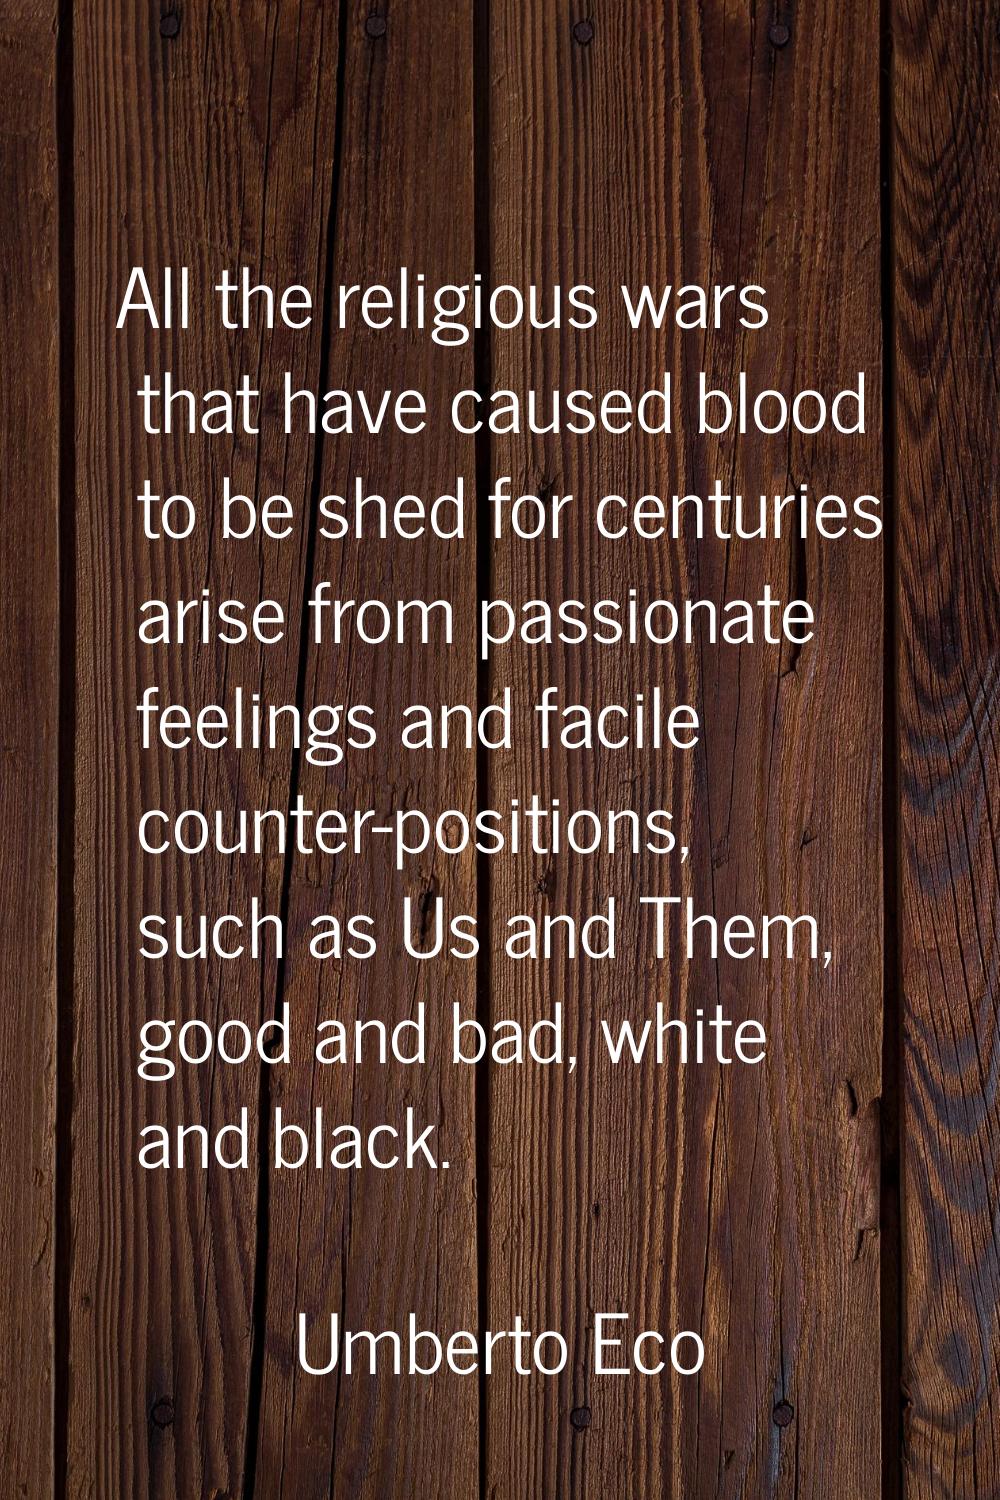 All the religious wars that have caused blood to be shed for centuries arise from passionate feelin